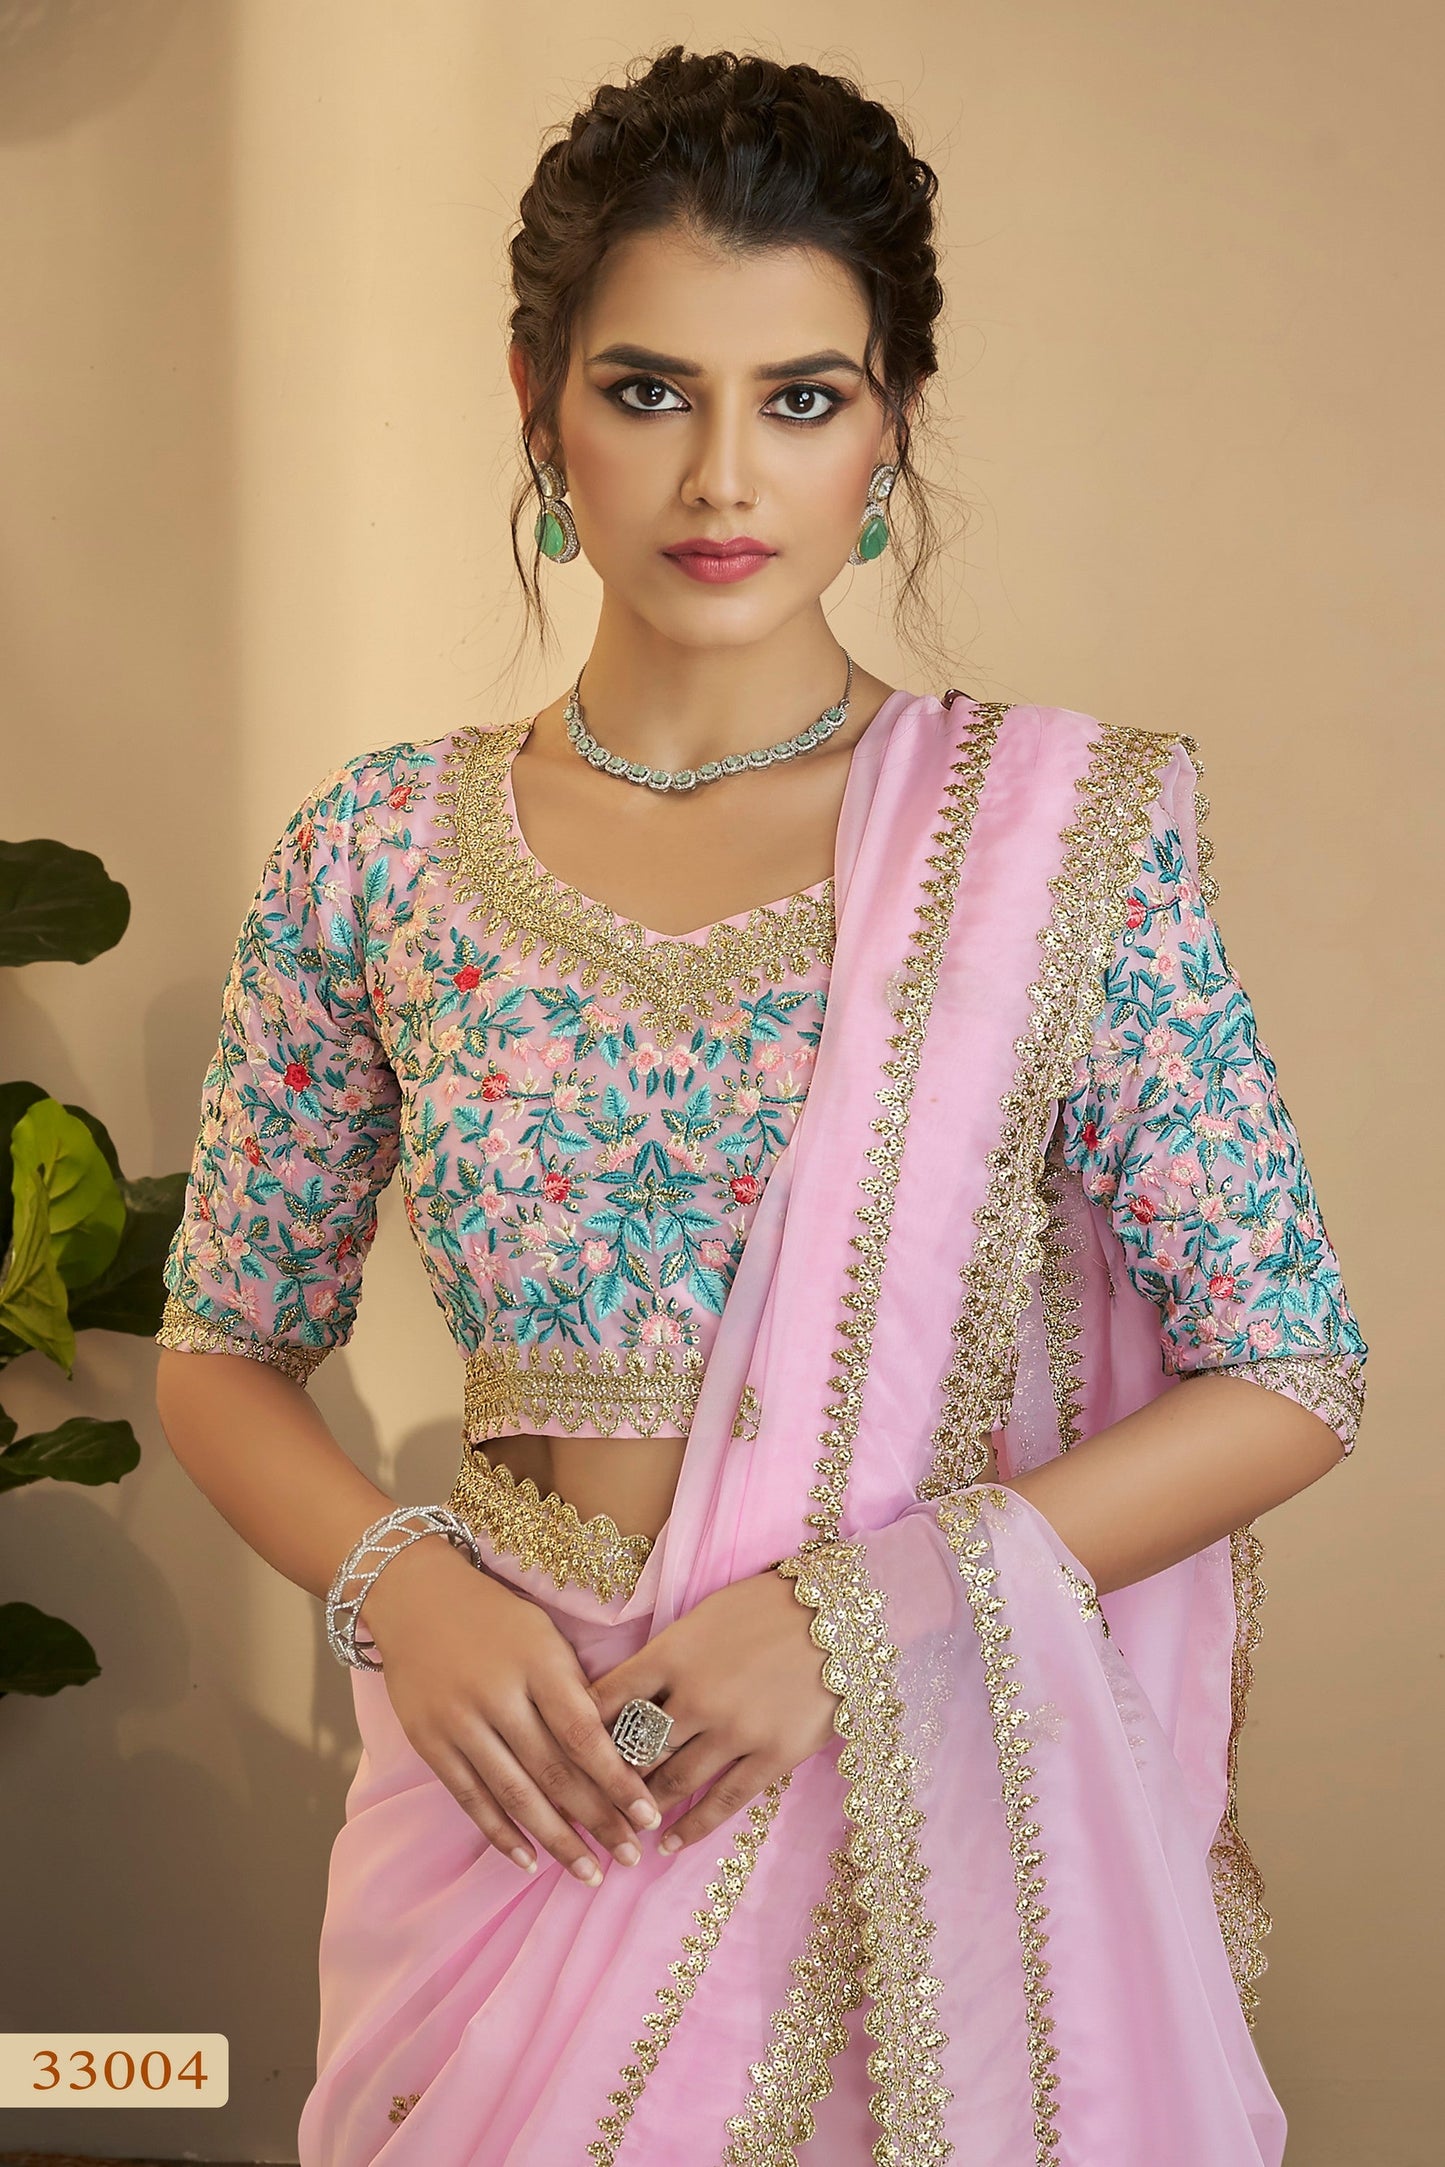 Baby Pink Organza Sarees with Blouse for Wedding | Indian Festival Sari - Thread Embroidery Work, Zari Work